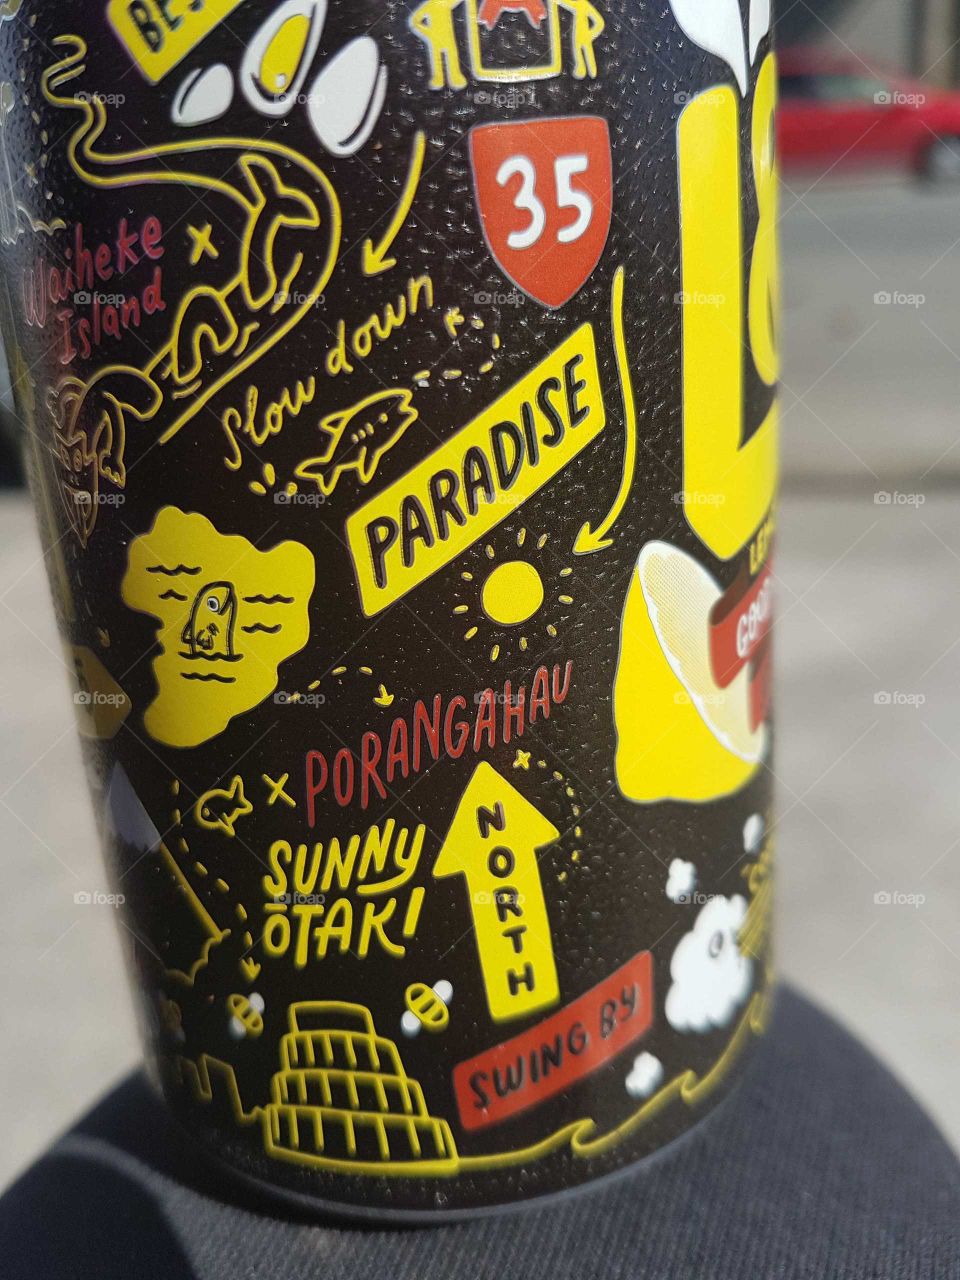 A Lemon drink can. Made in New Zealand words and pictures represent our country and some of our towns.